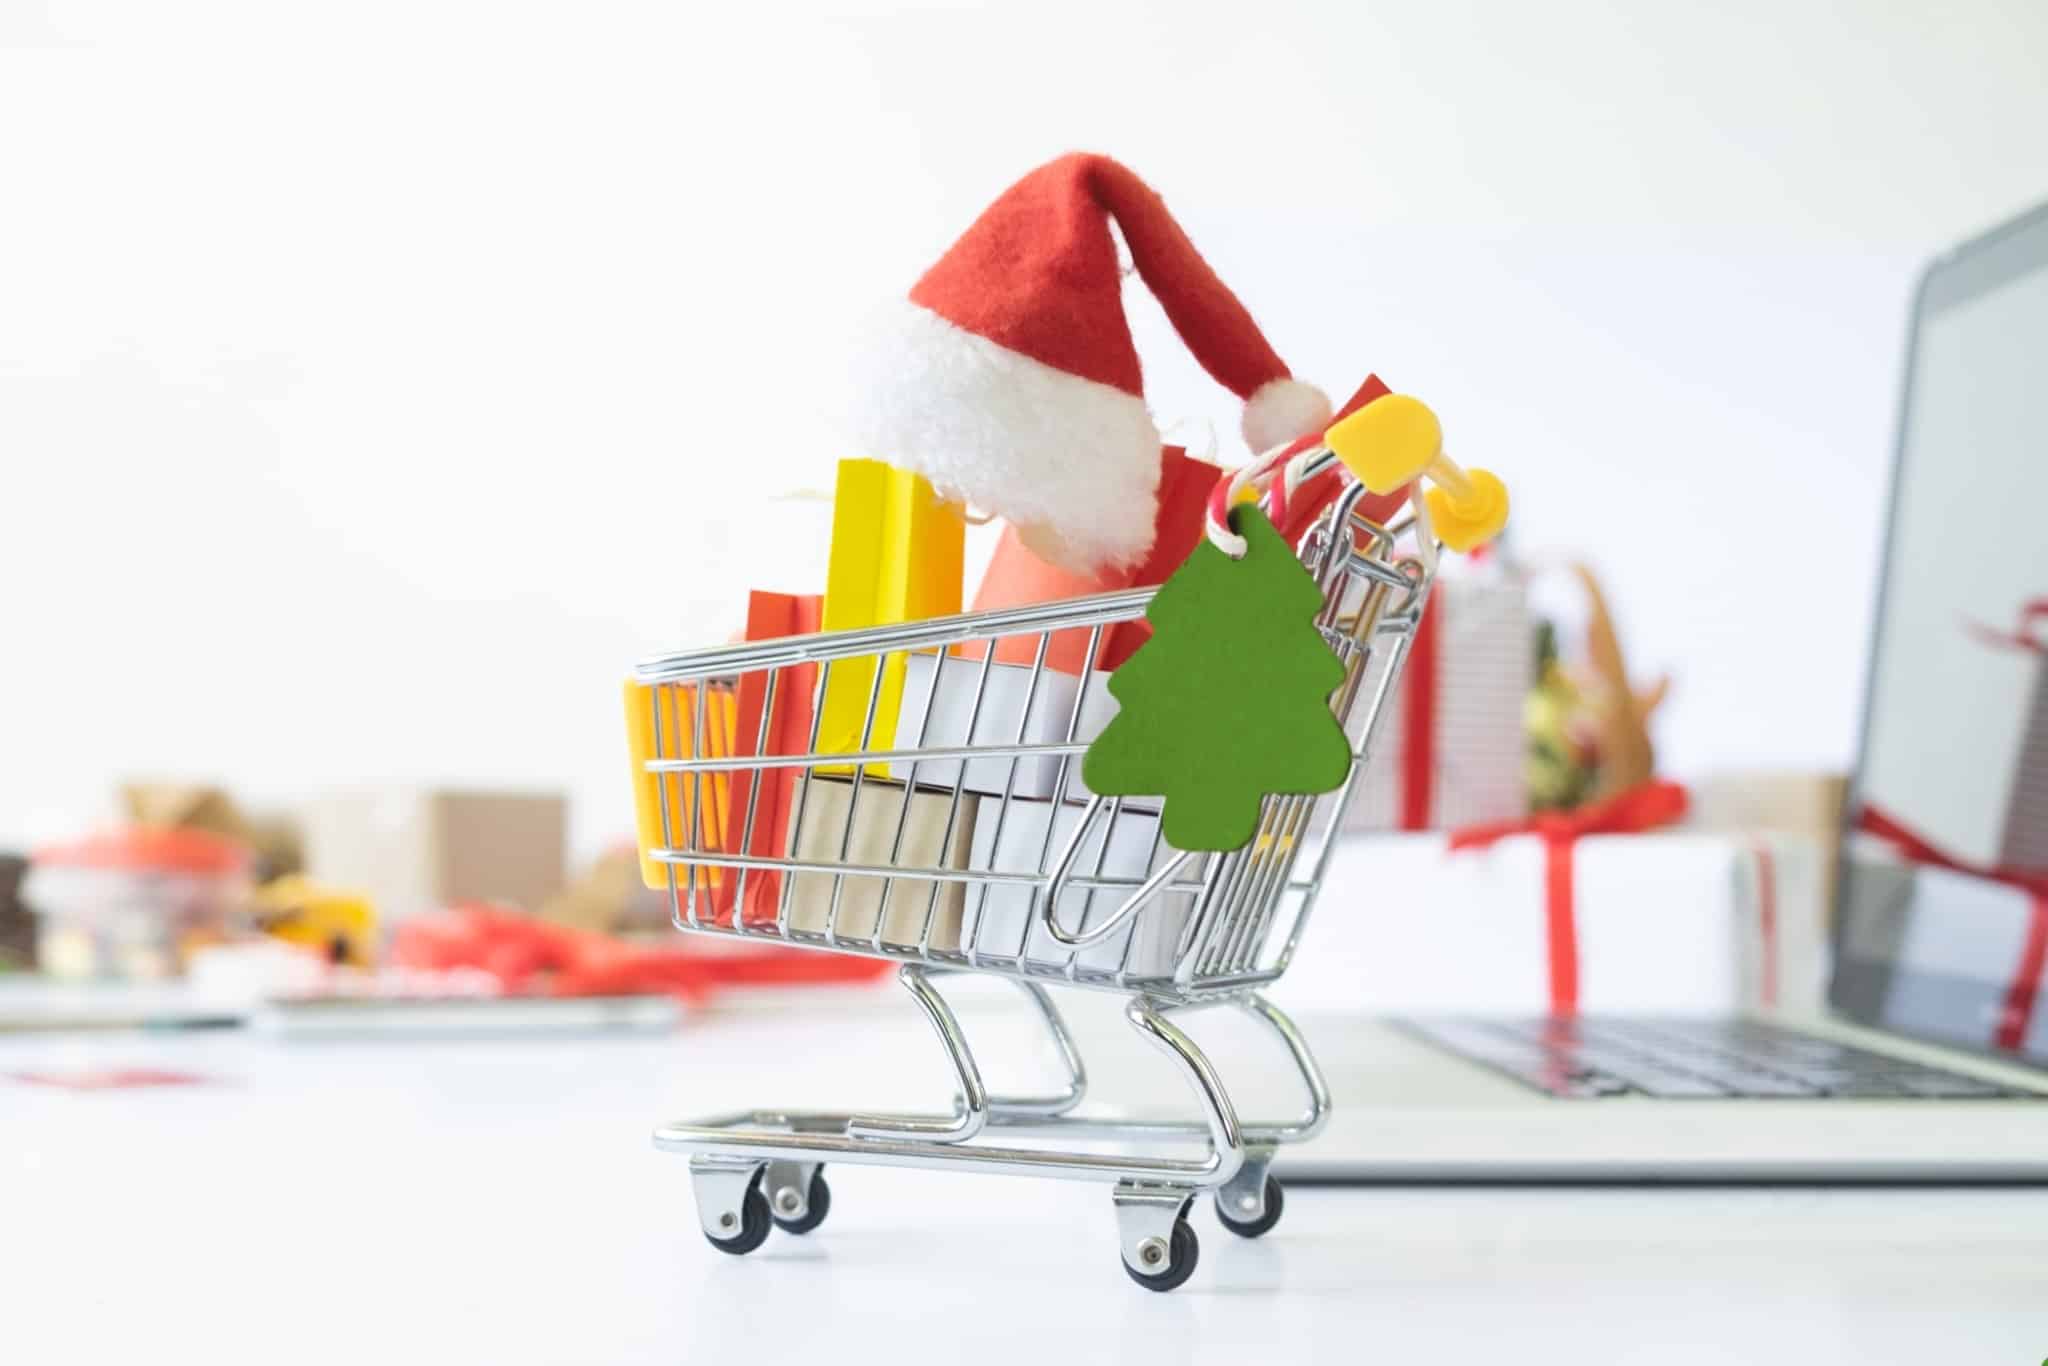 Christmas expenses illustrated with a photographic production that brought together symbols of the season inside a miniature supermarket trolley, placed on top of a laptop computer and Christmas packages